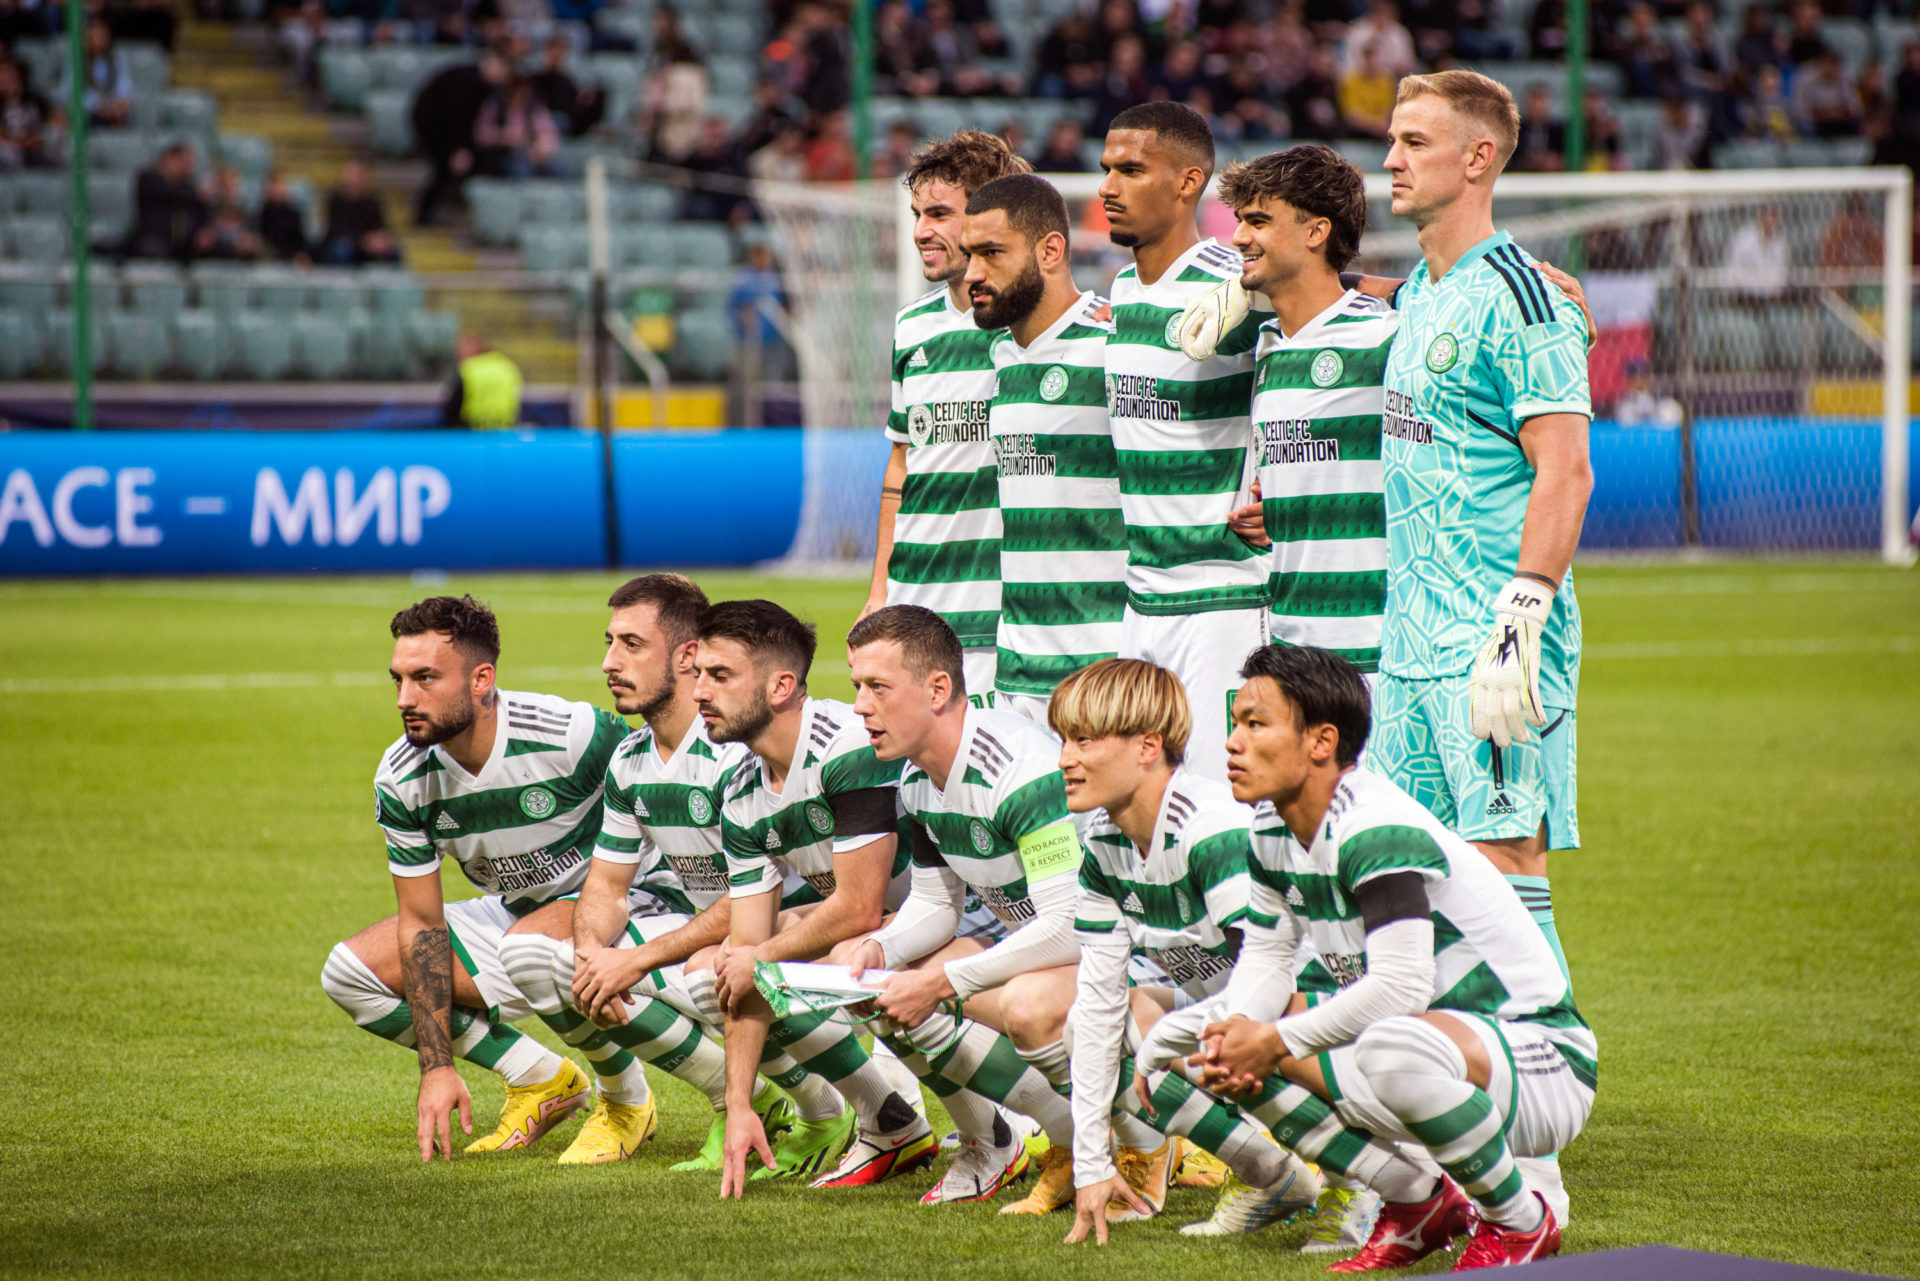 SPFL - Good luck to Celtic FC, who play Ferencvárosi TC in #UEL group stage  action this afternoon (3:30pm kick-off). Like if you're backing Celtic!